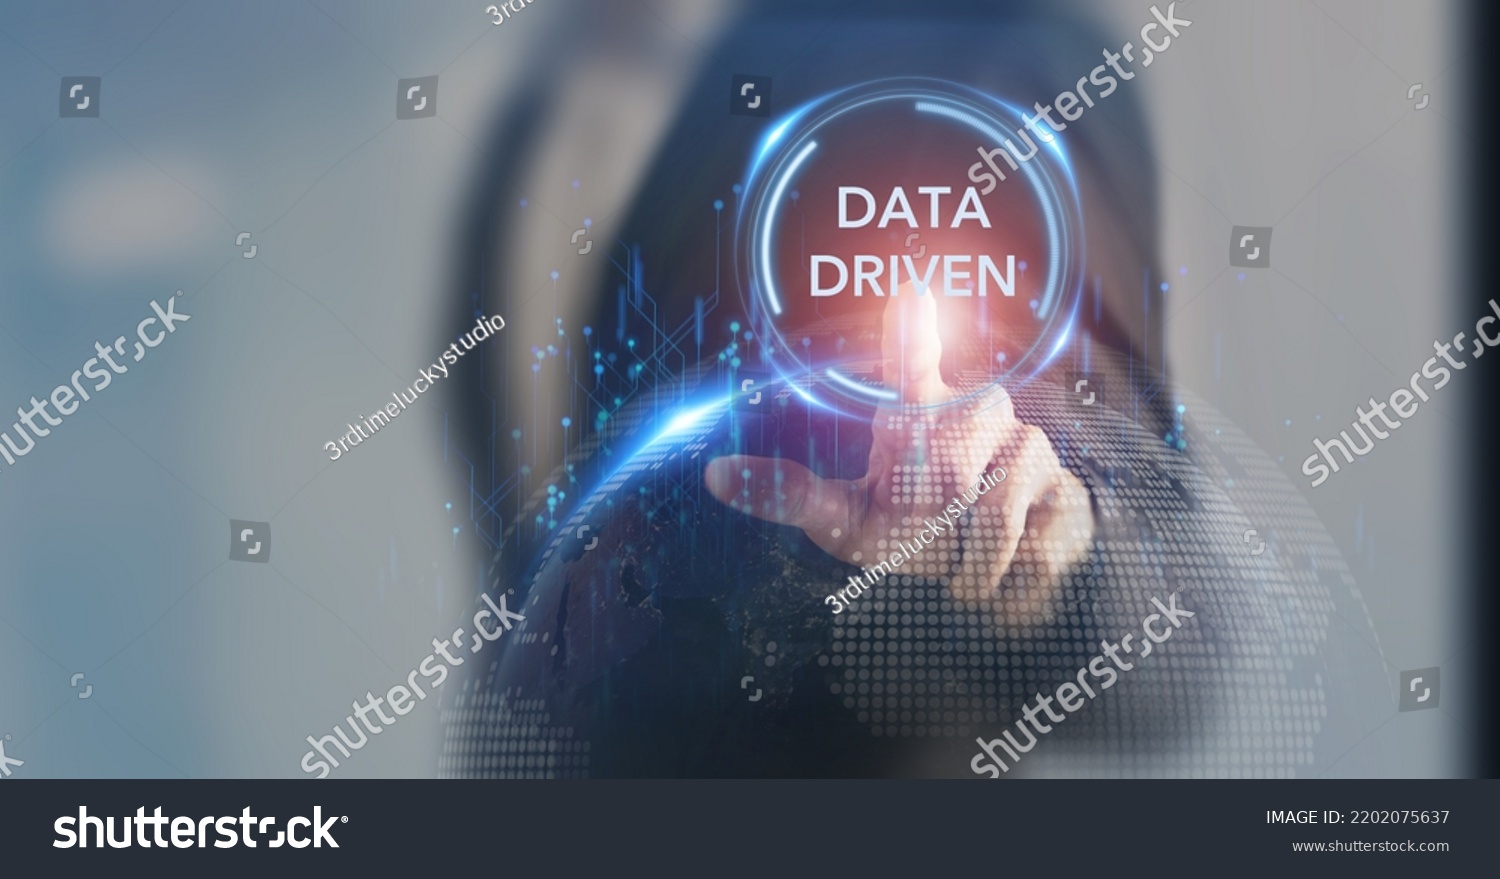 Data driven marketing concept. Collecting big data and analytics, personalized and contextual marketing. Digital marketing and technology, artificial intelligenace, machine learning, digital twin. #2202075637